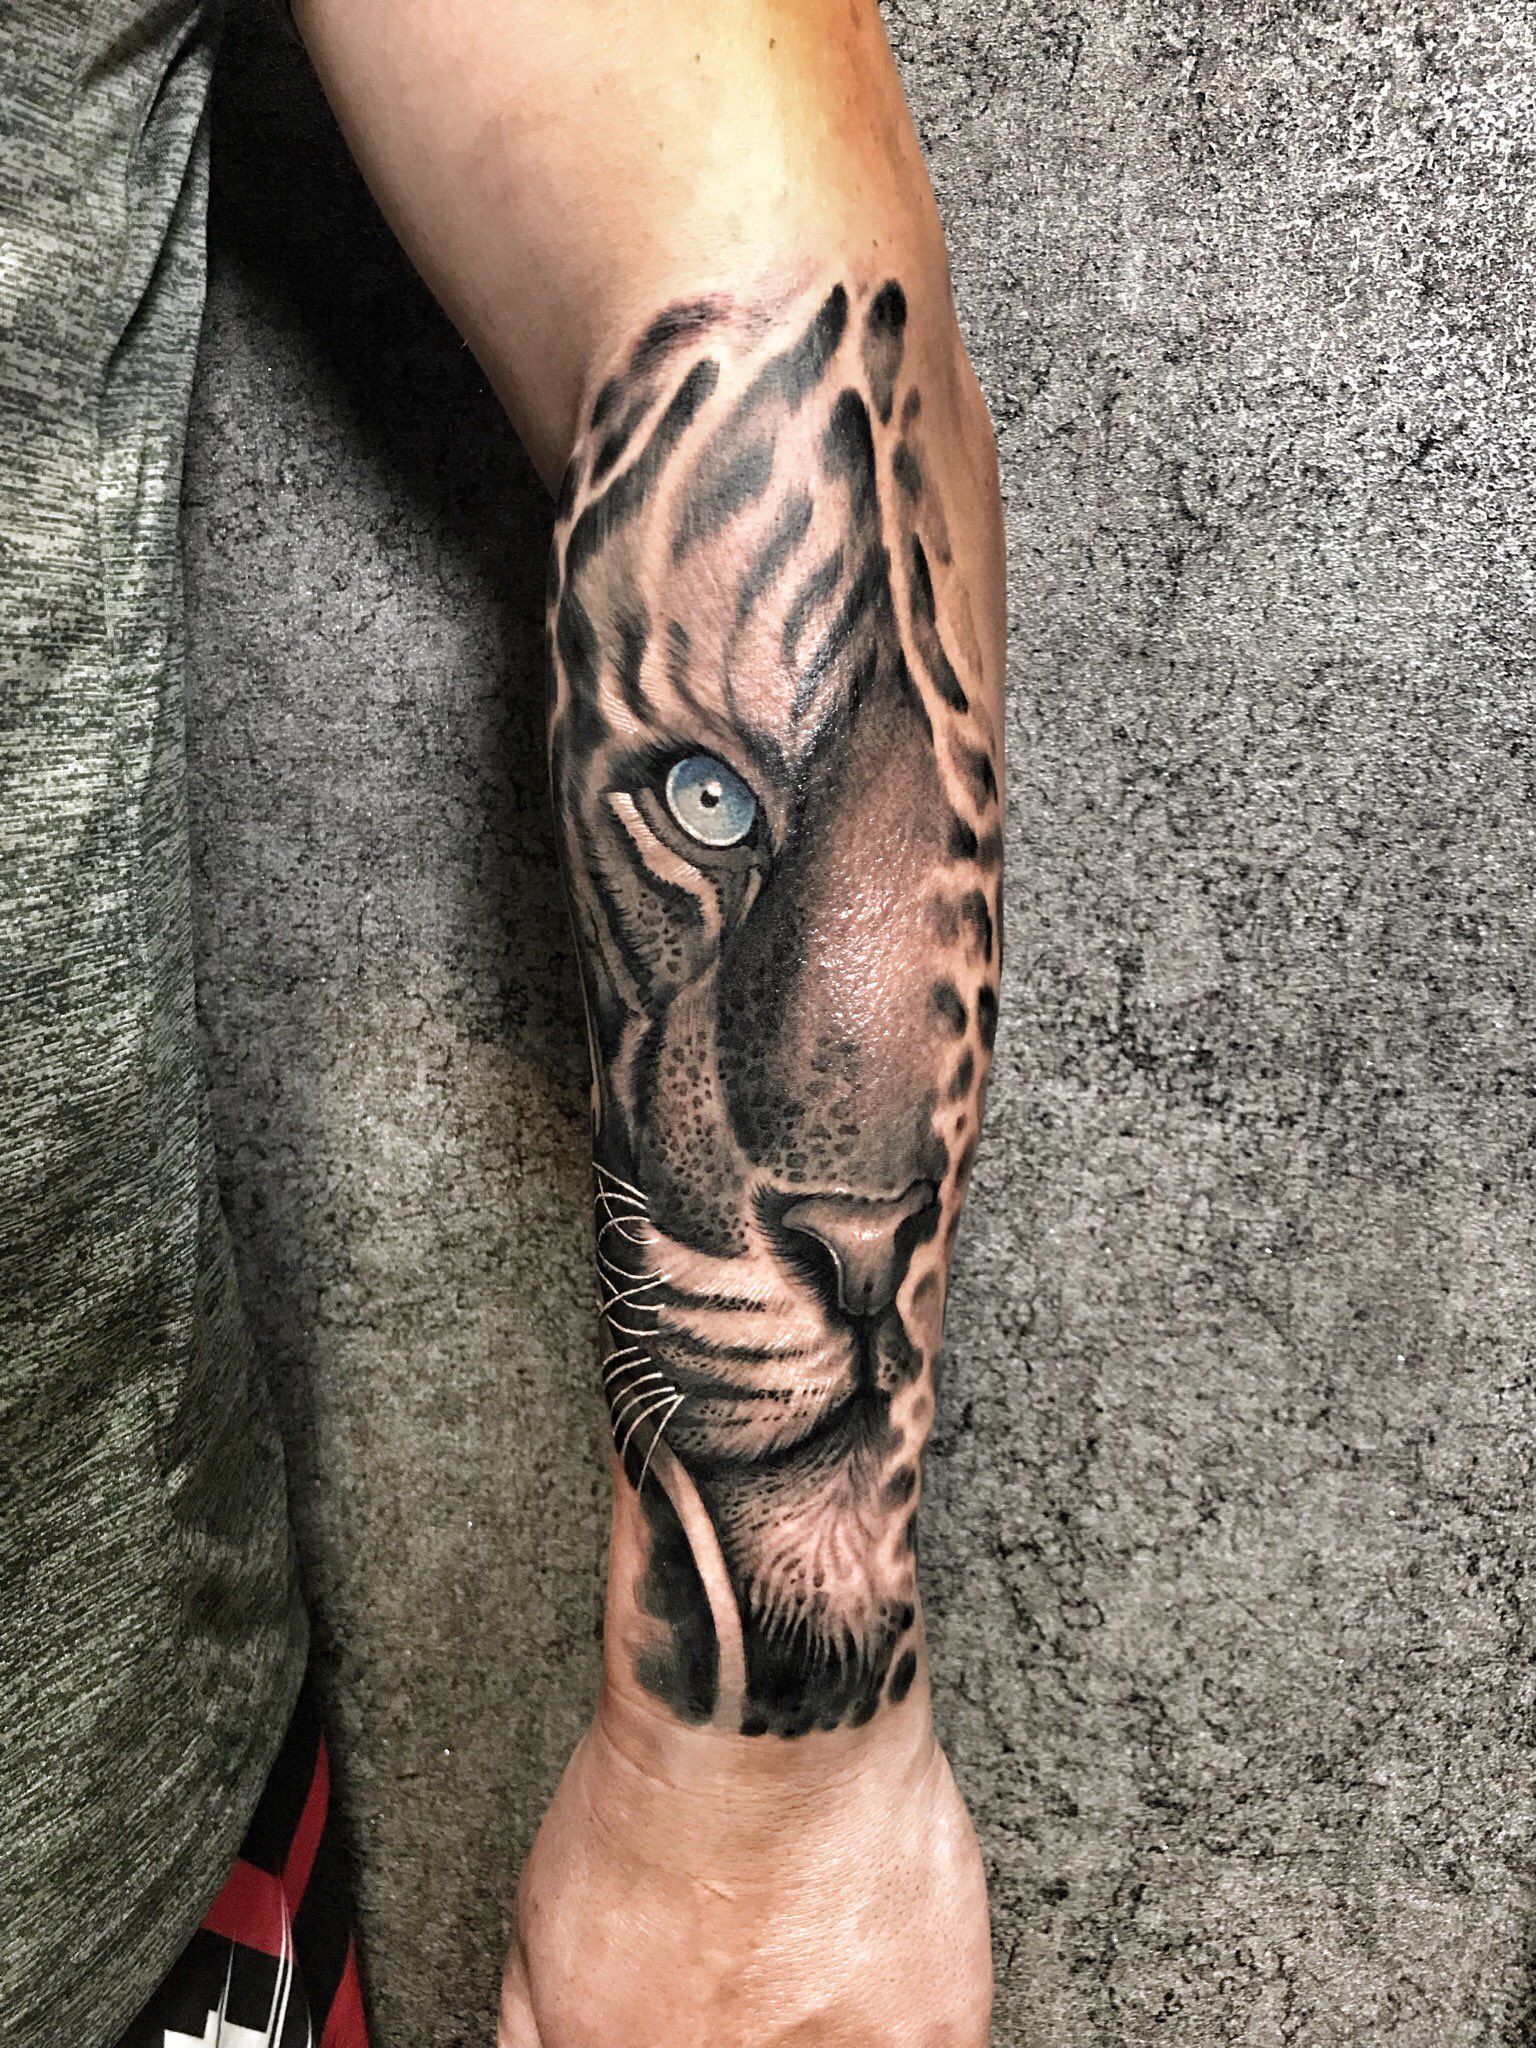 Dubai tattoos on Instagram  Tiger tattoo  Dubai bookings open   For more info please dm me in WhatsApp link in my bio Tattoos made with  love  tattoo